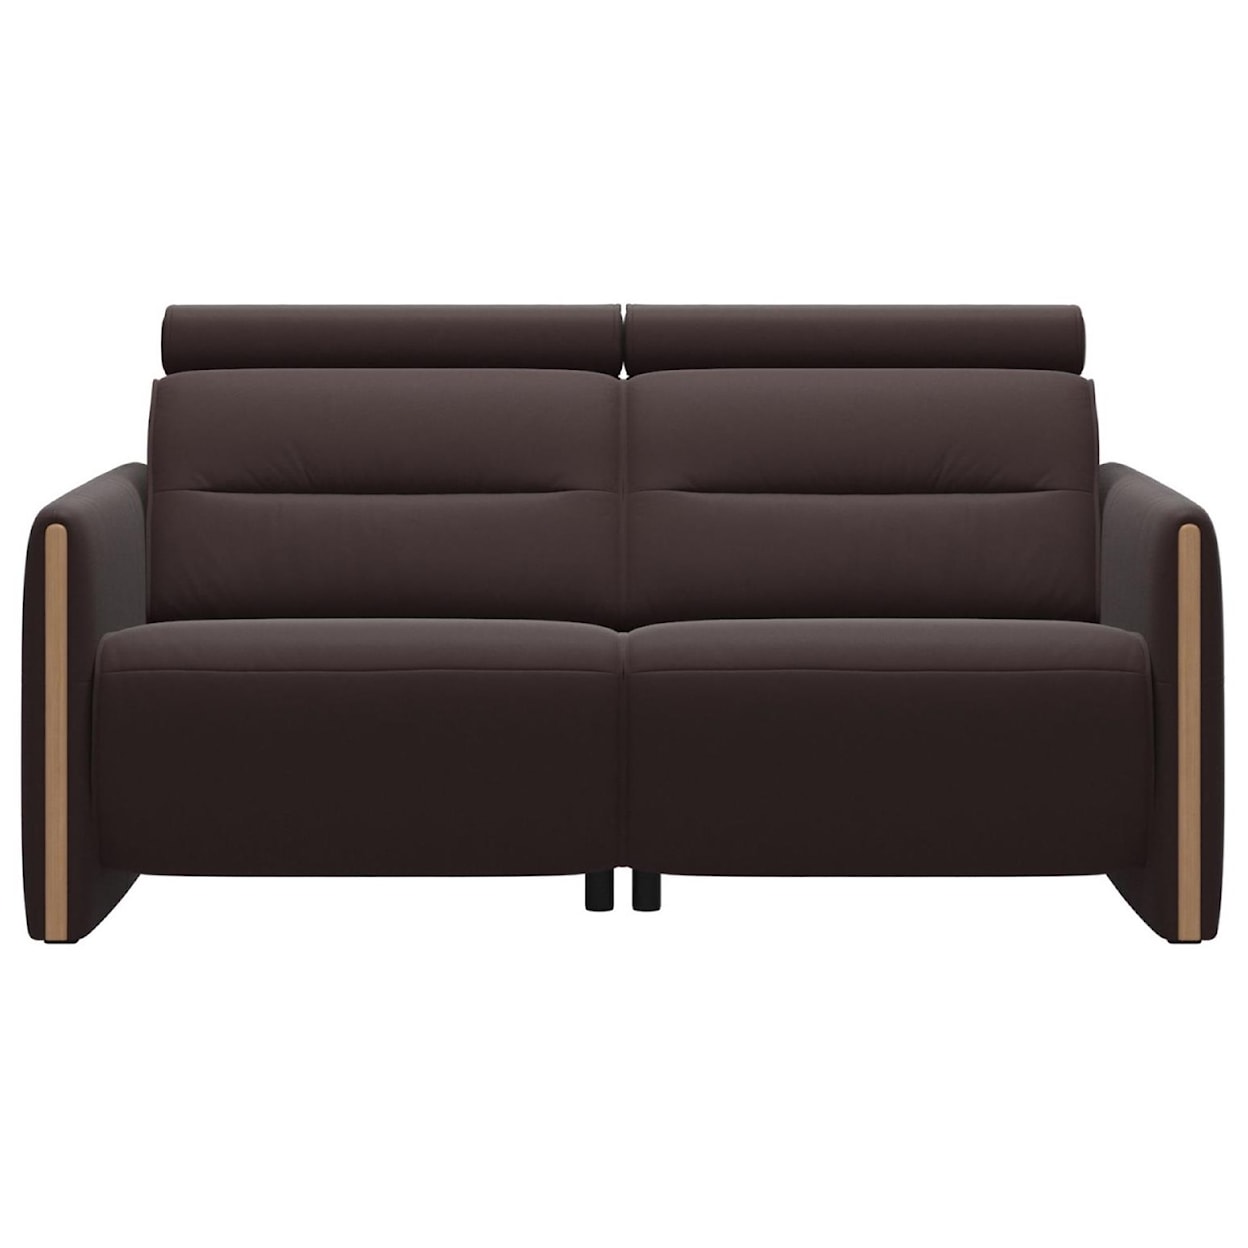 Stressless Emily Power 2-Seat Sofa with Wood Arms